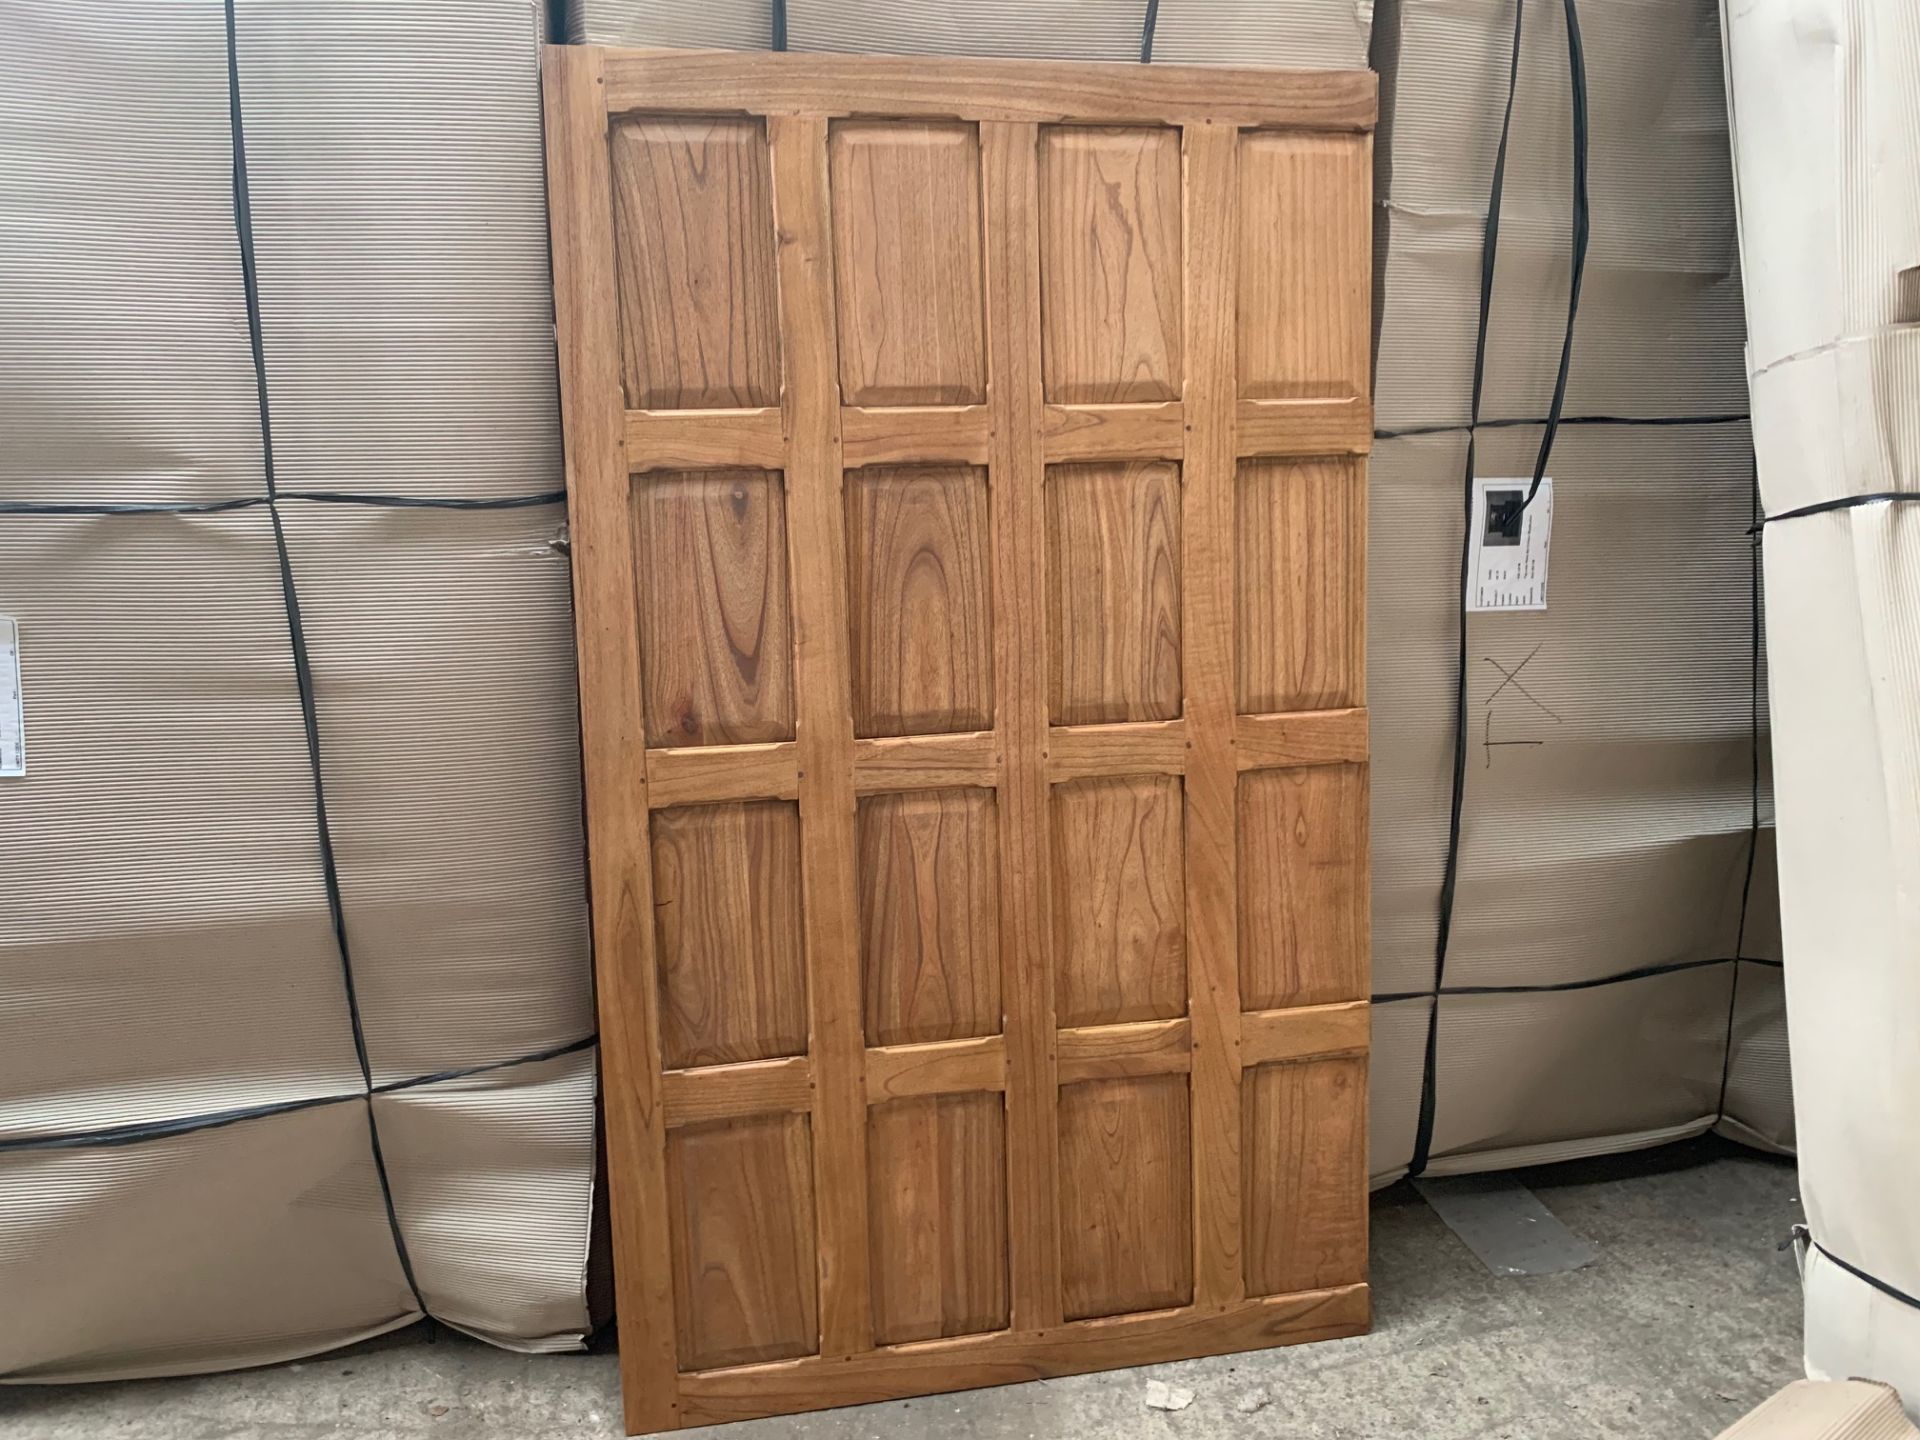 HIGH QUALITY TEAK WOOD PANEL (APPROX 1885MM TALL X 1160MM WIDE)